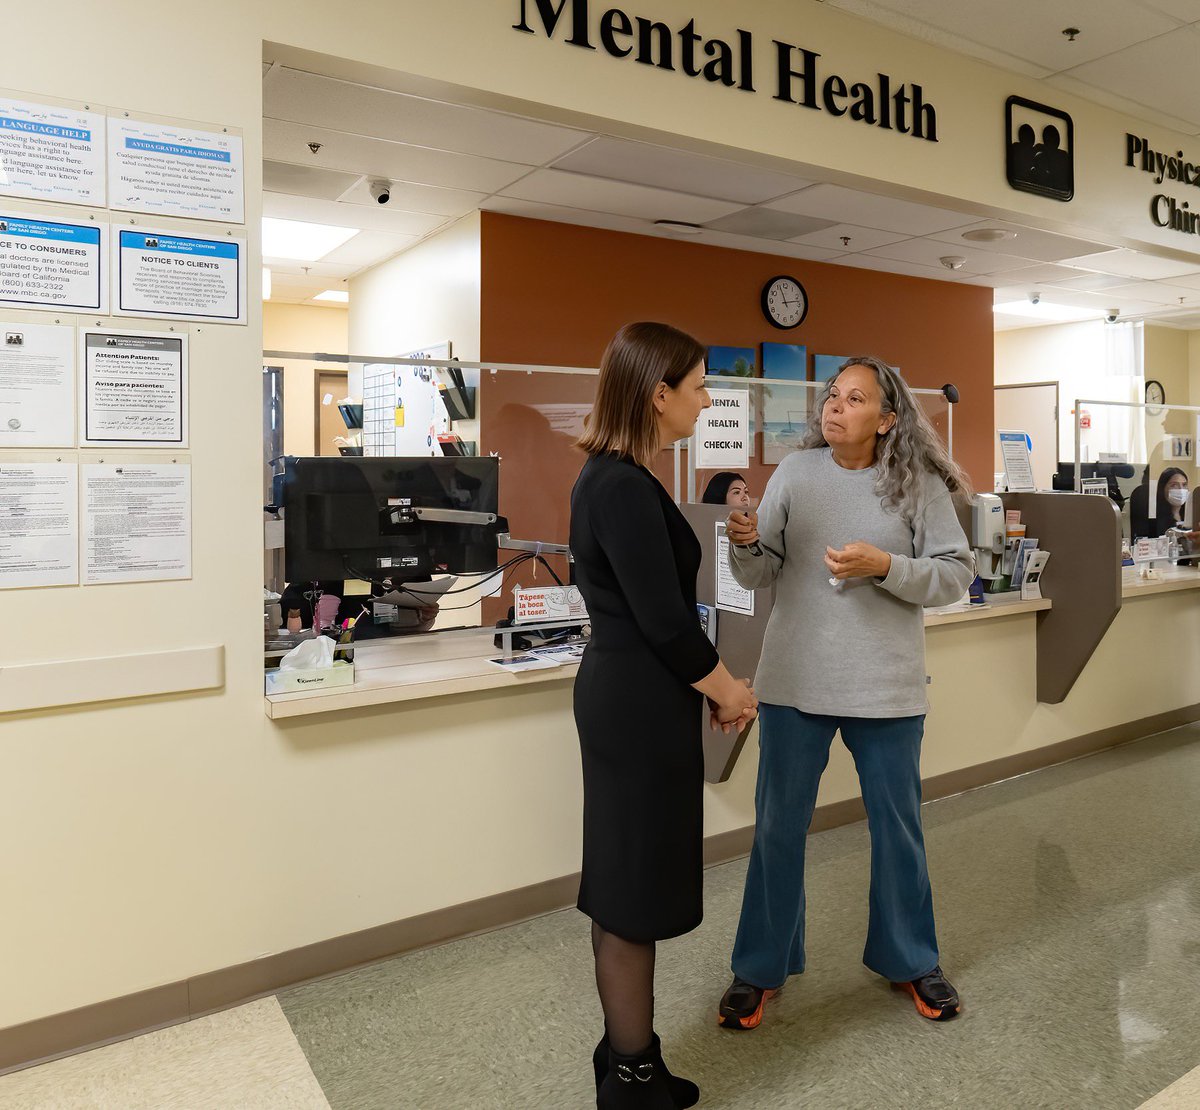 Visited City Heights @FamilyHealthSD to see their great work to improve the mental health of their community! FQHC’s are critical to connecting folks with mental health care in their communities. Their new outpatient building also has housing for patients - a fantastic resource.